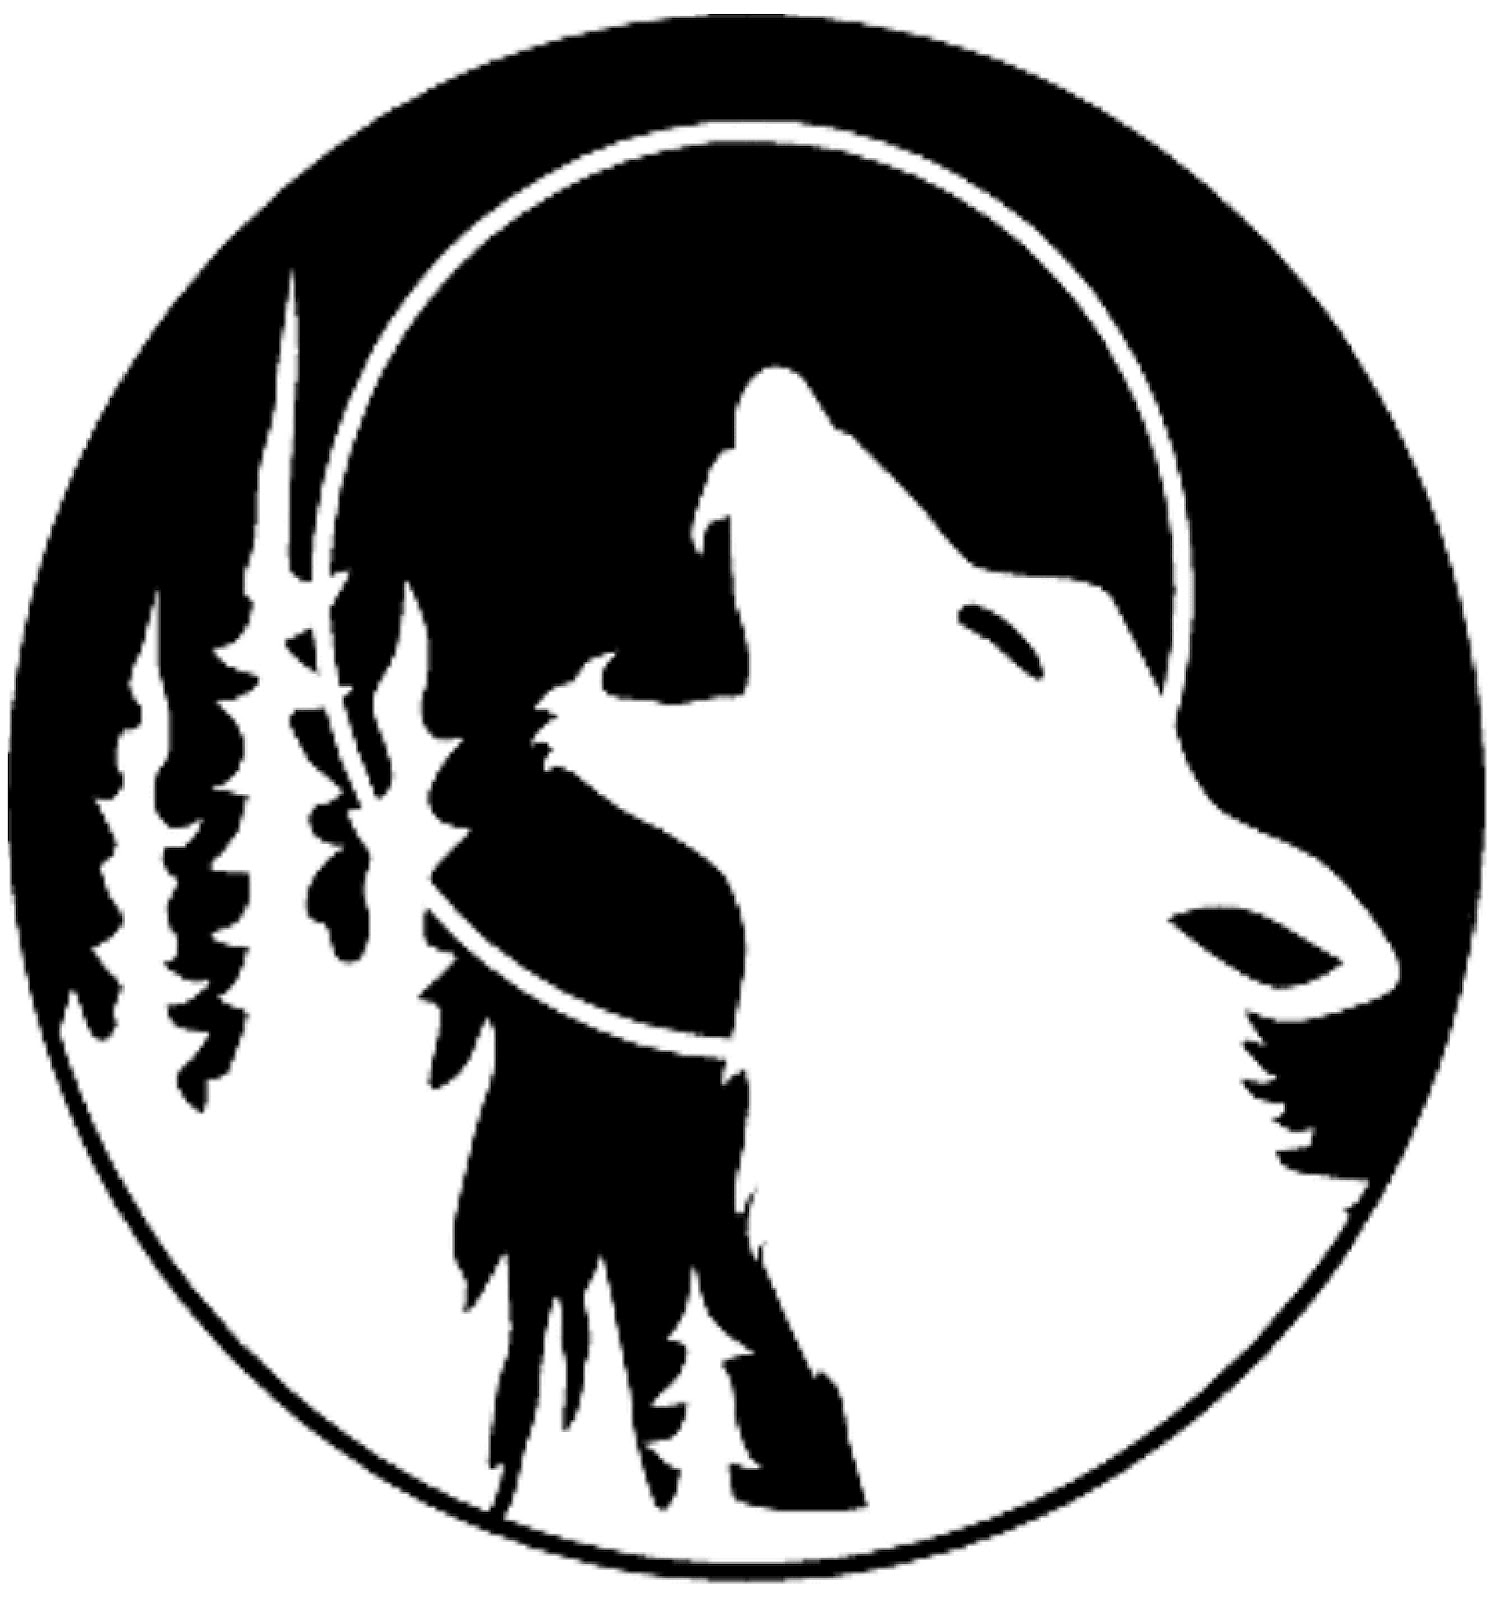 WOLVES Logo Template photo - 1